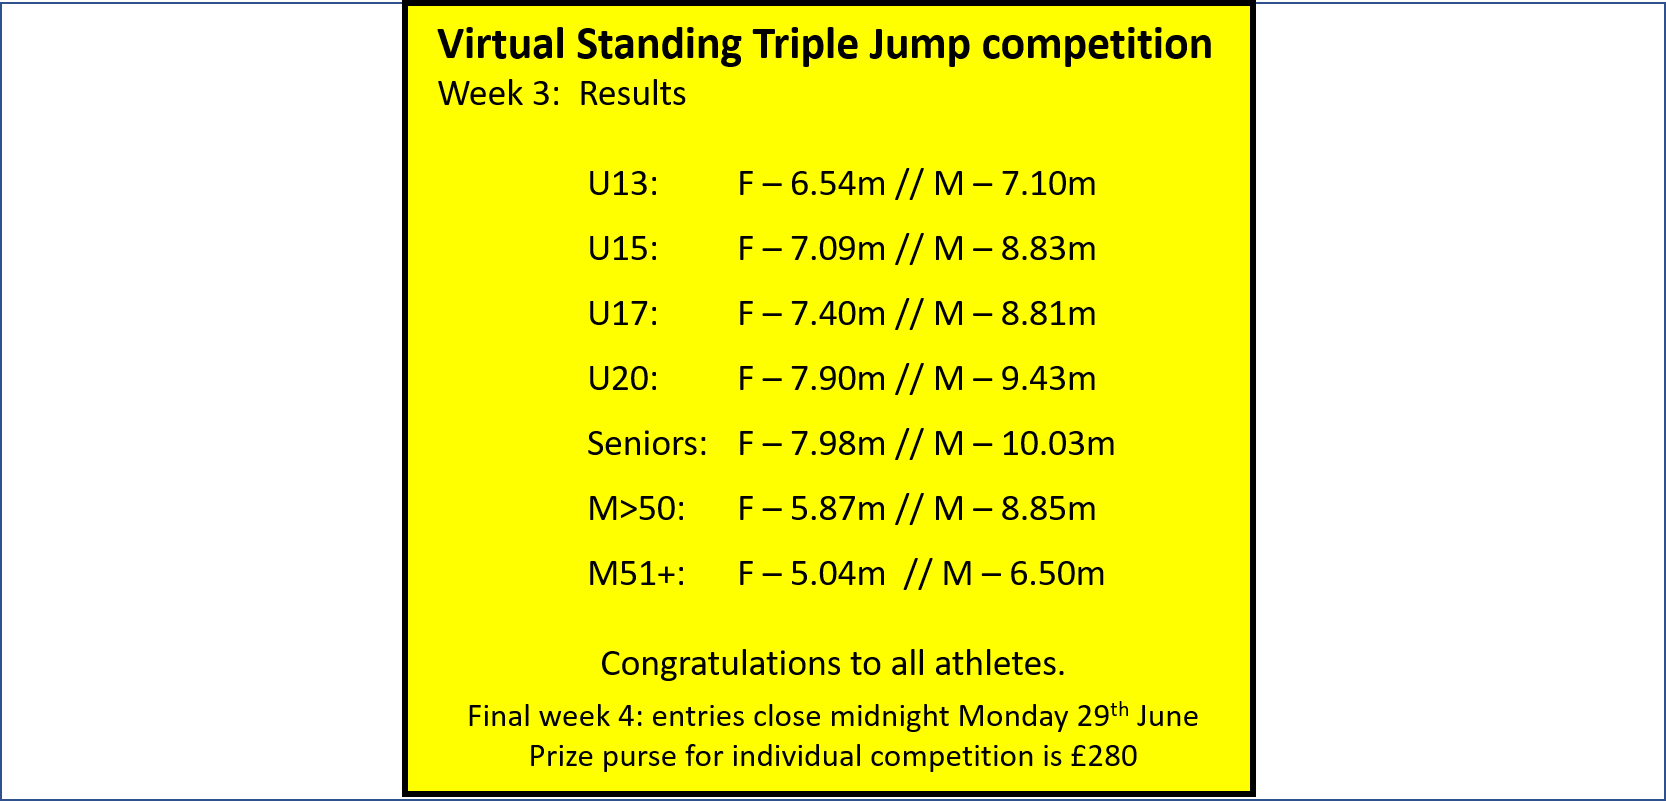 Virtual Standing Triple Jump competition - Week 3 results